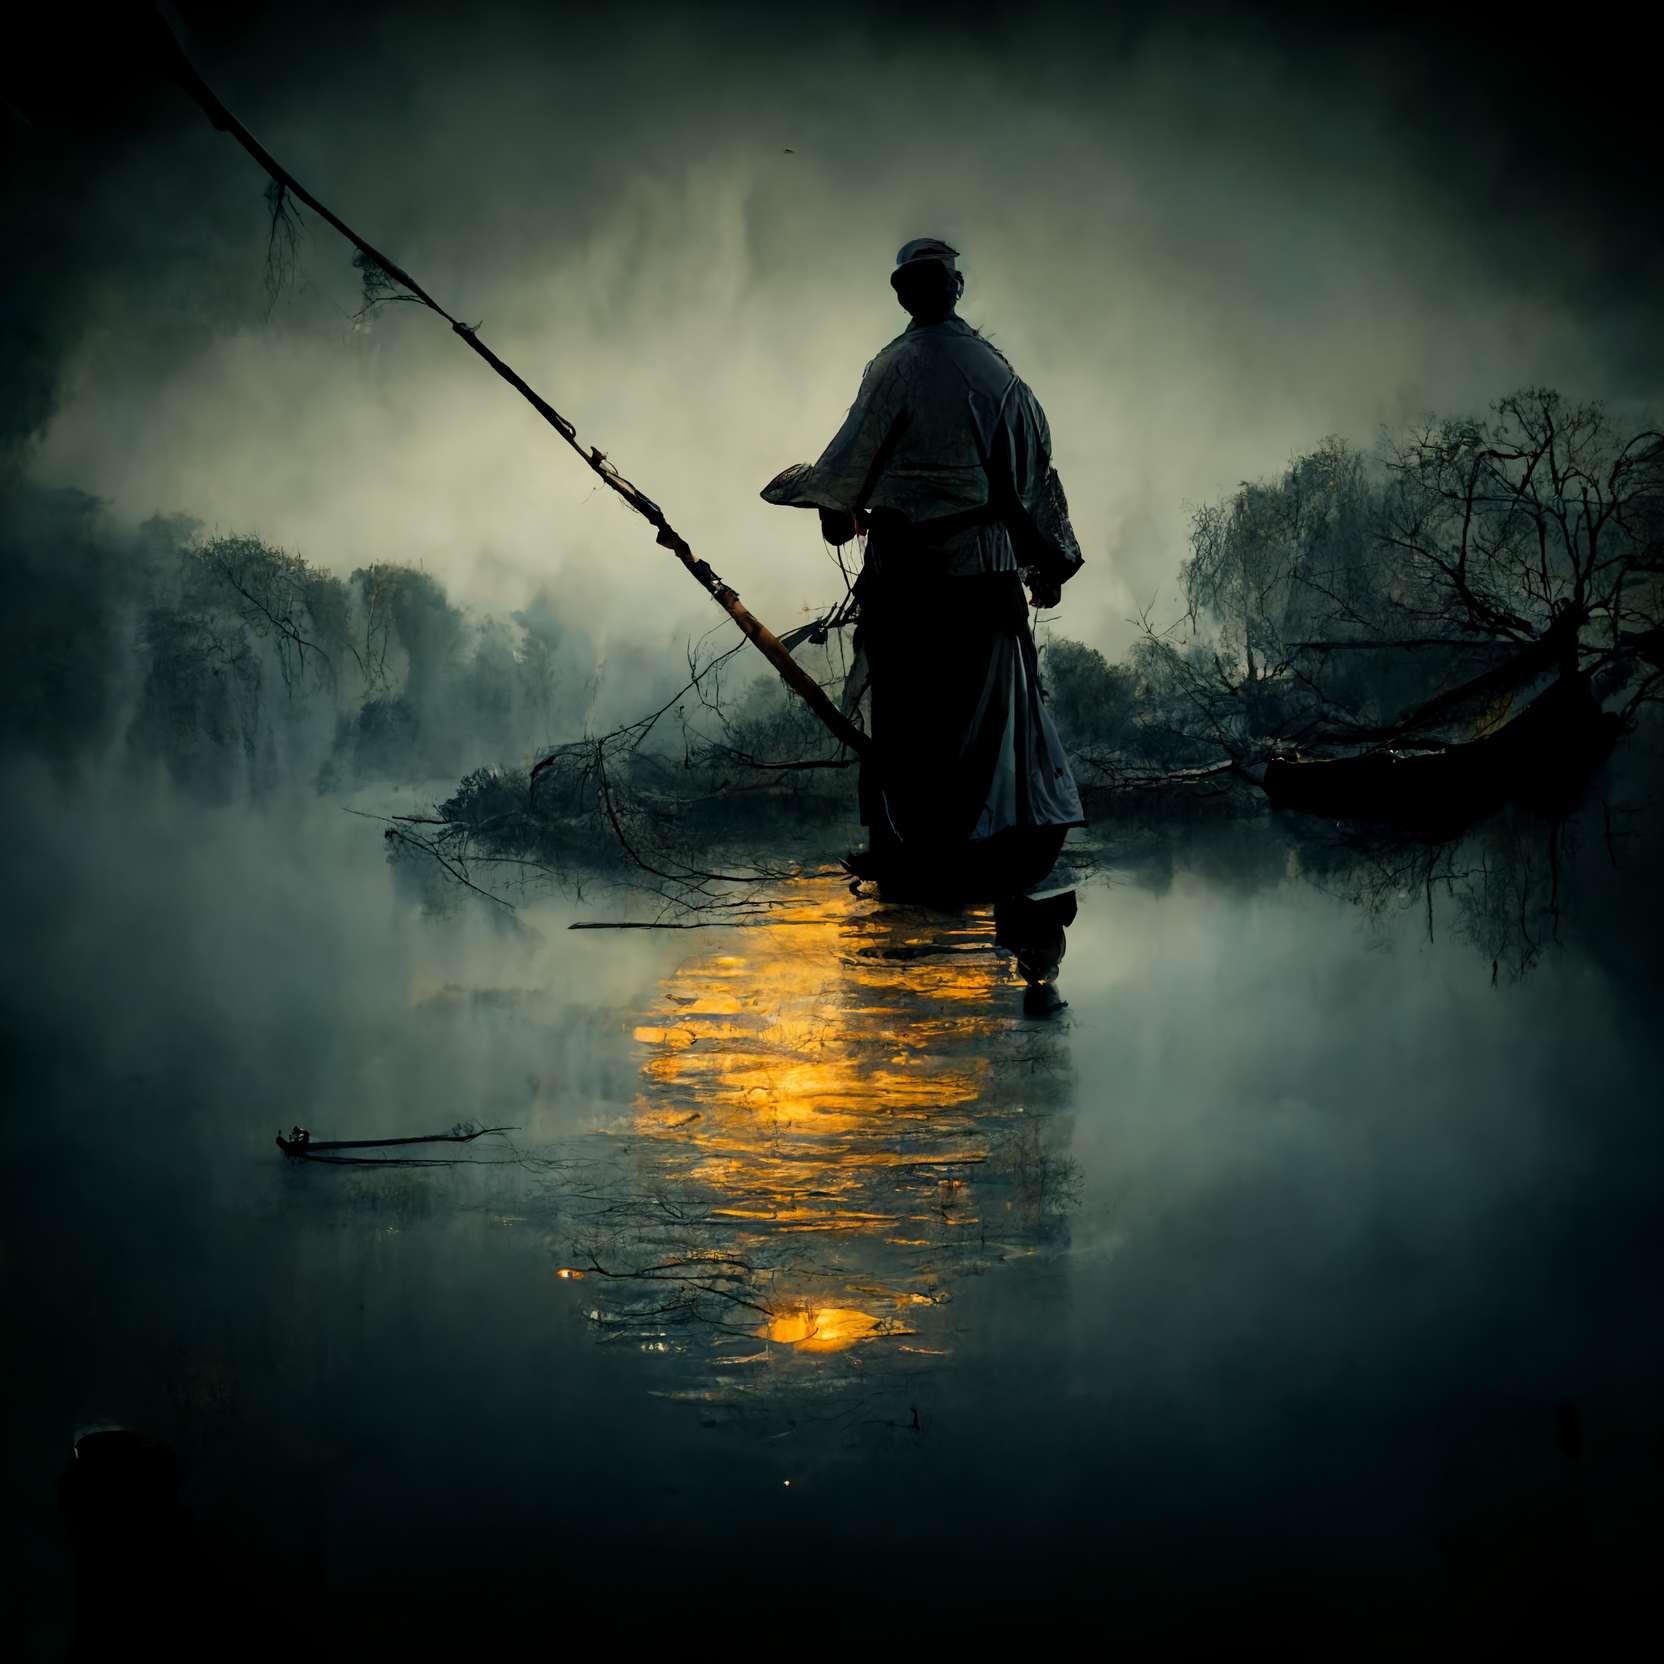 Fisherman by Luis Dato